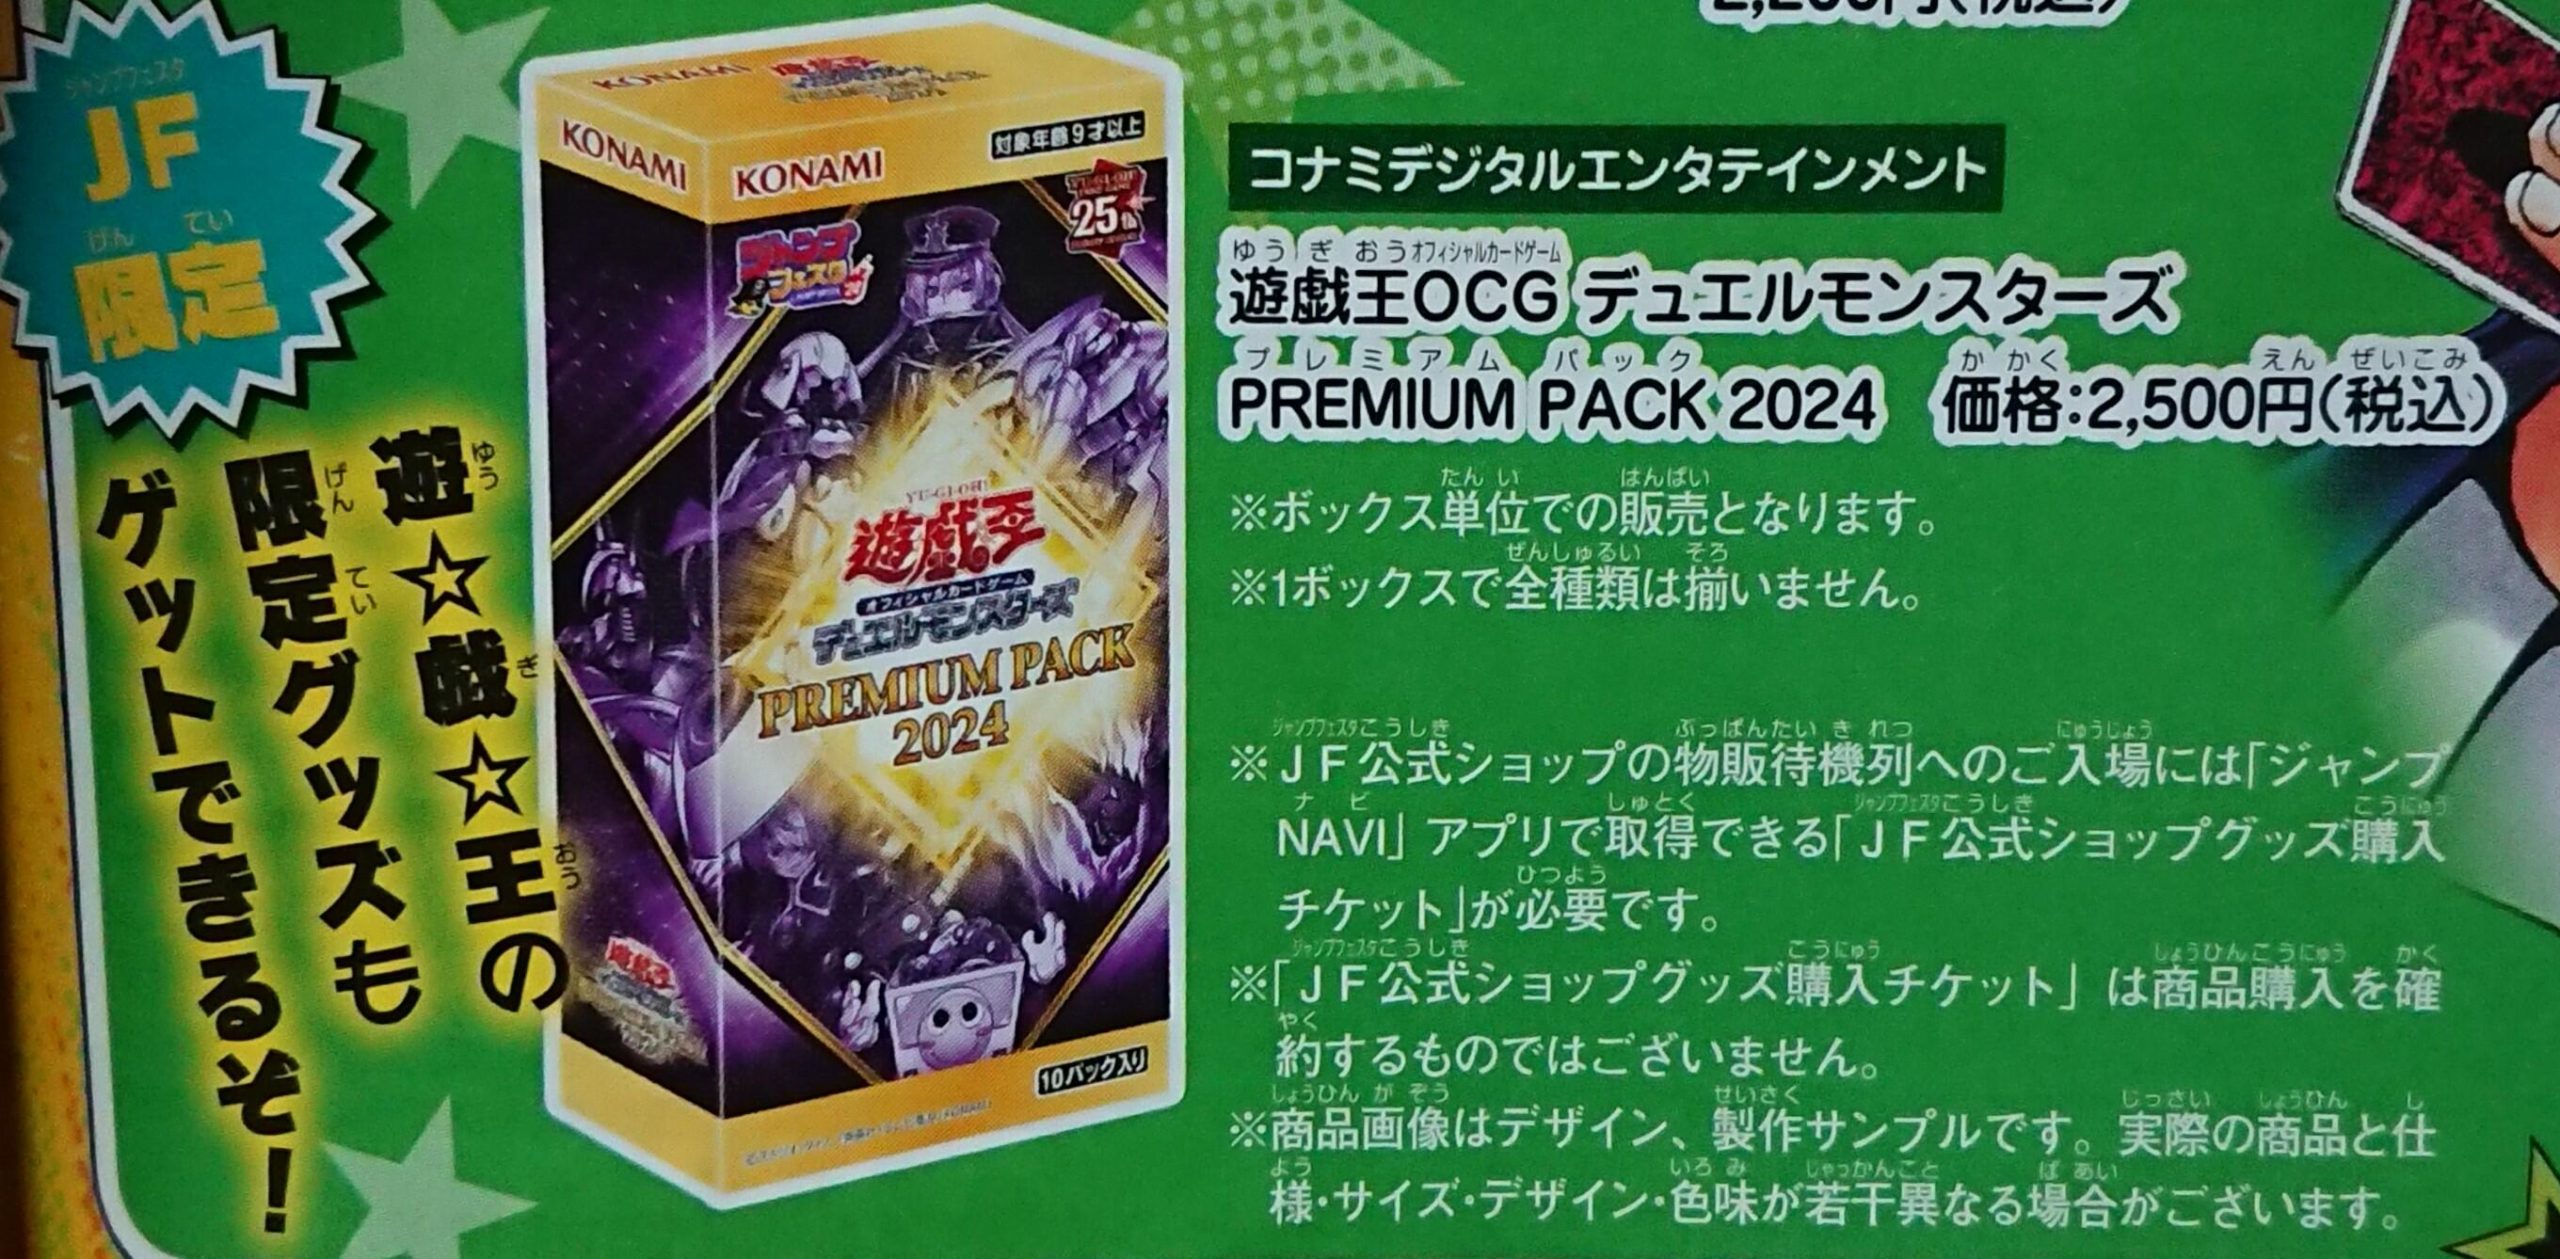 Volcanic Support, Electrodes, & More! Premium Pack 2024 Goodies